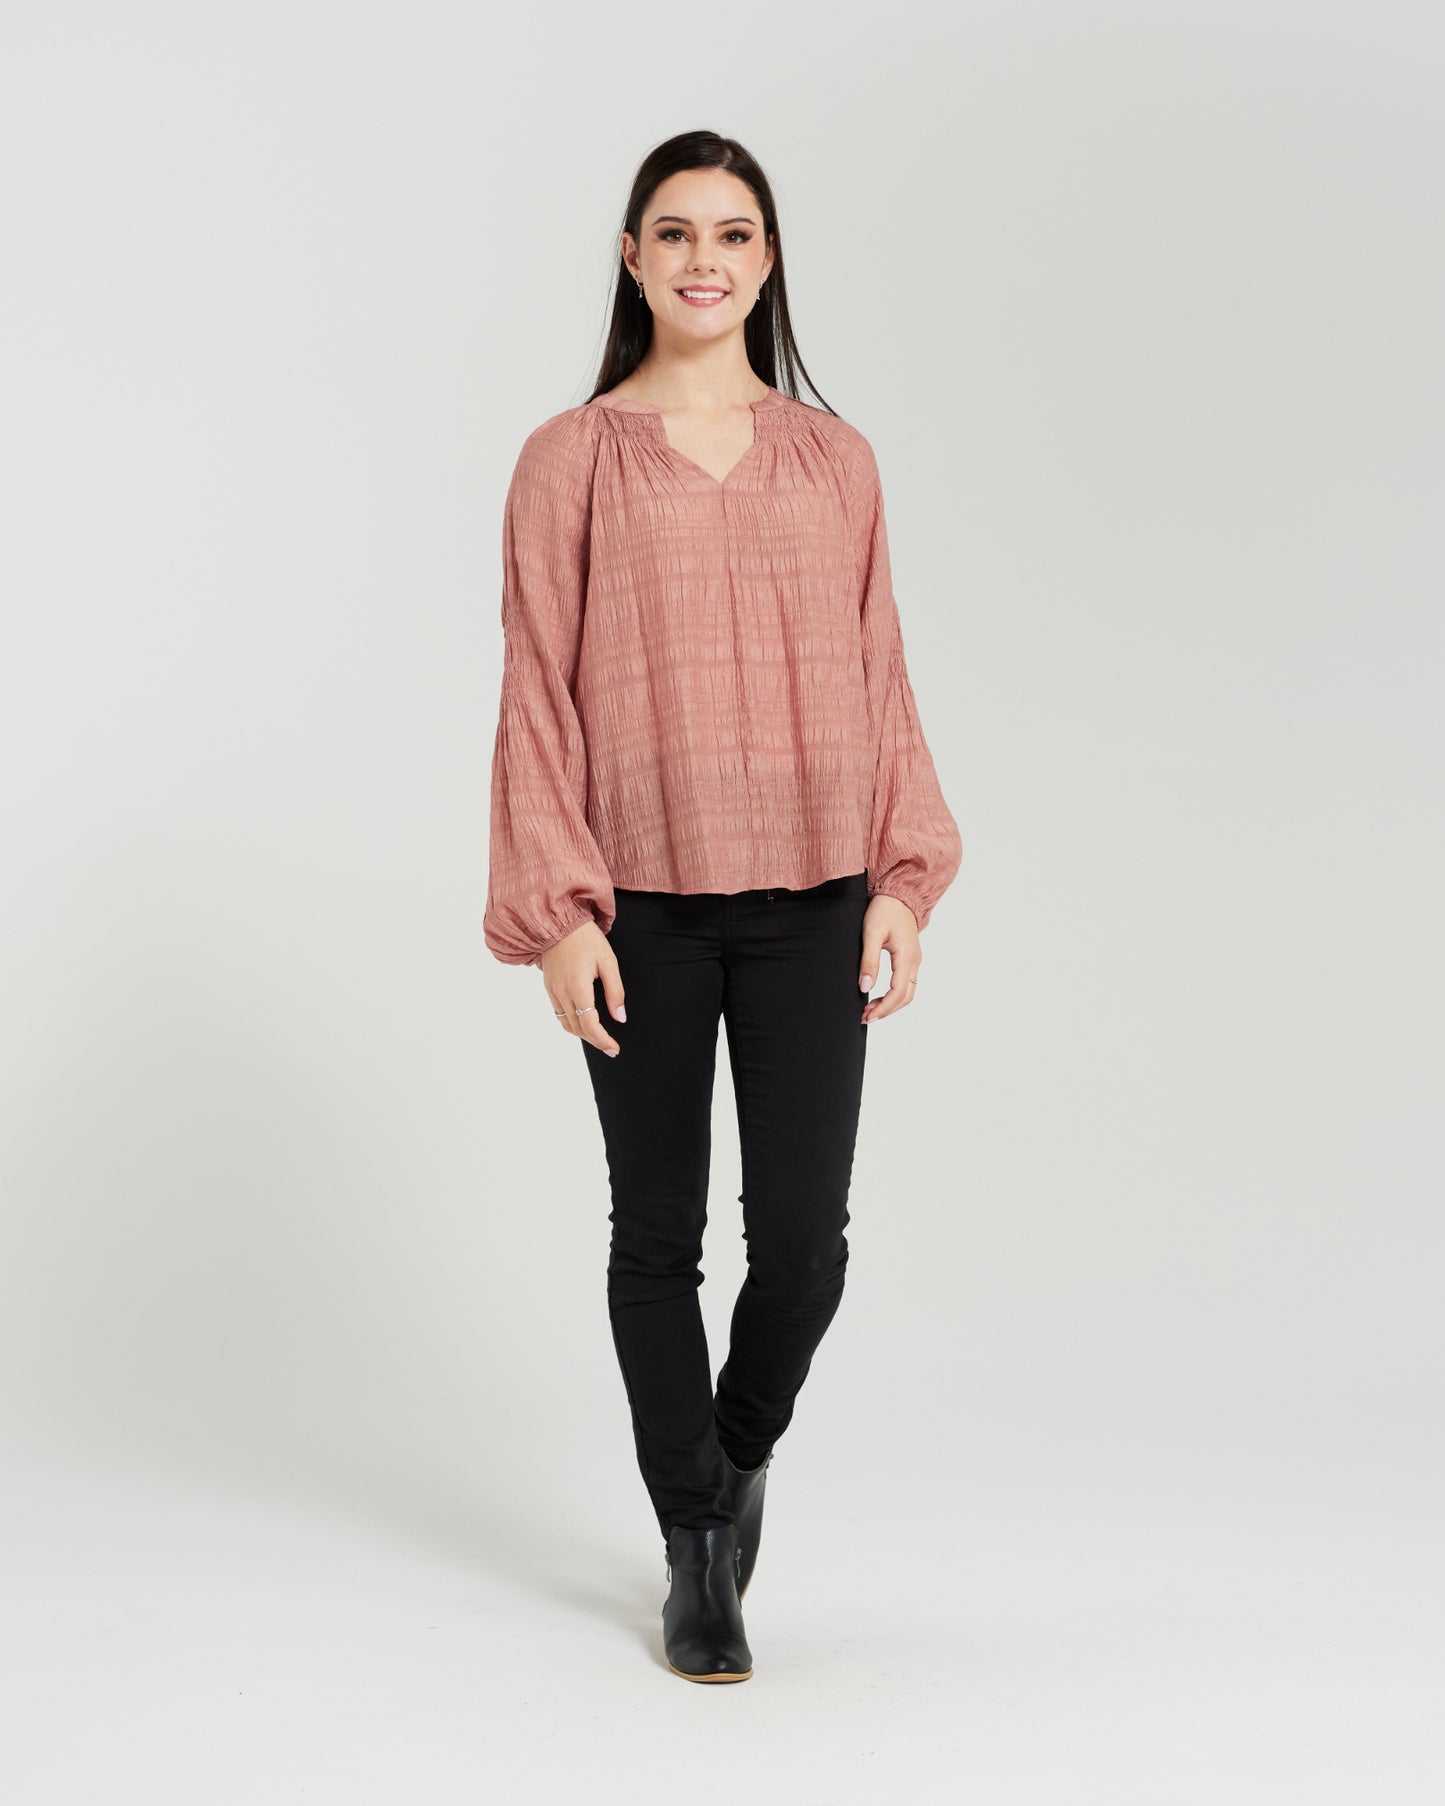 Zafina - Belinda Top - Dusty Pink - Due 1st March